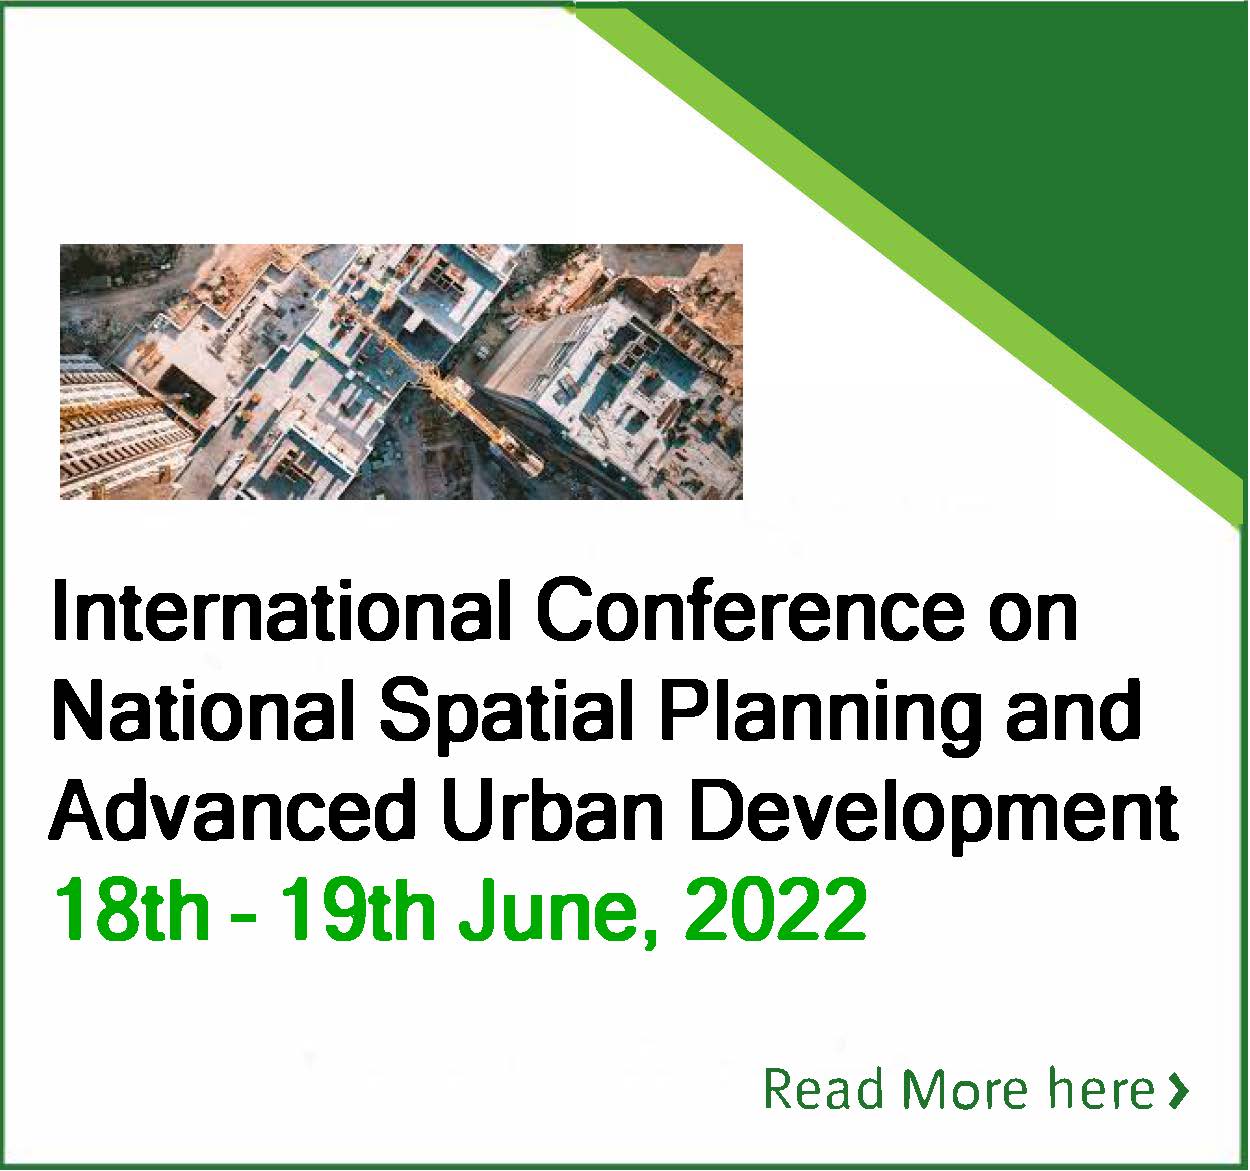 Call for Papers International Conference on National Spatial Planning